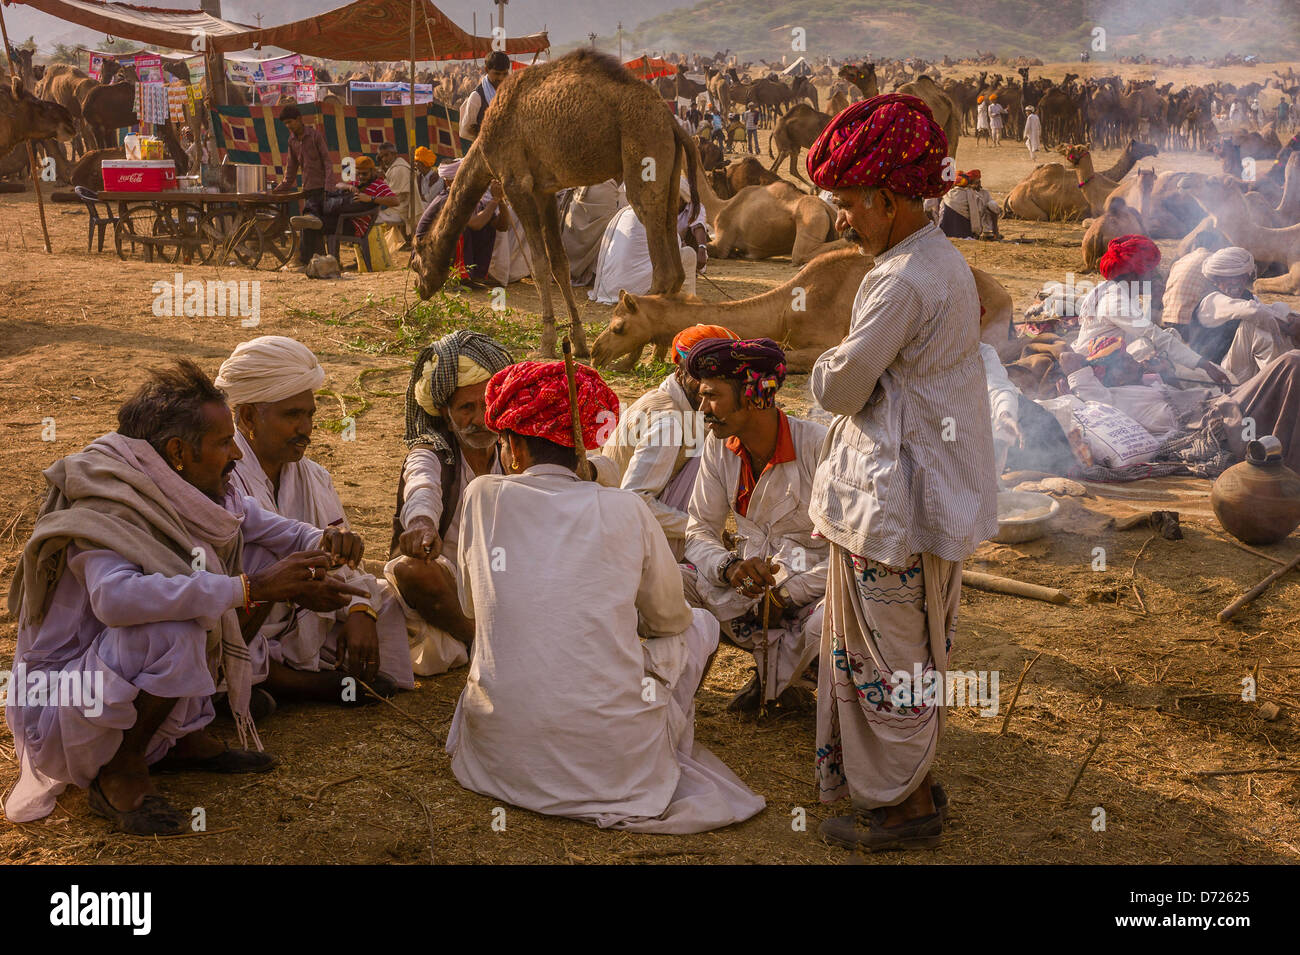 Rajput traders discuss the buying and selling of camels at the annual fair at Pushkar, Rajasthan, India. Stock Photo